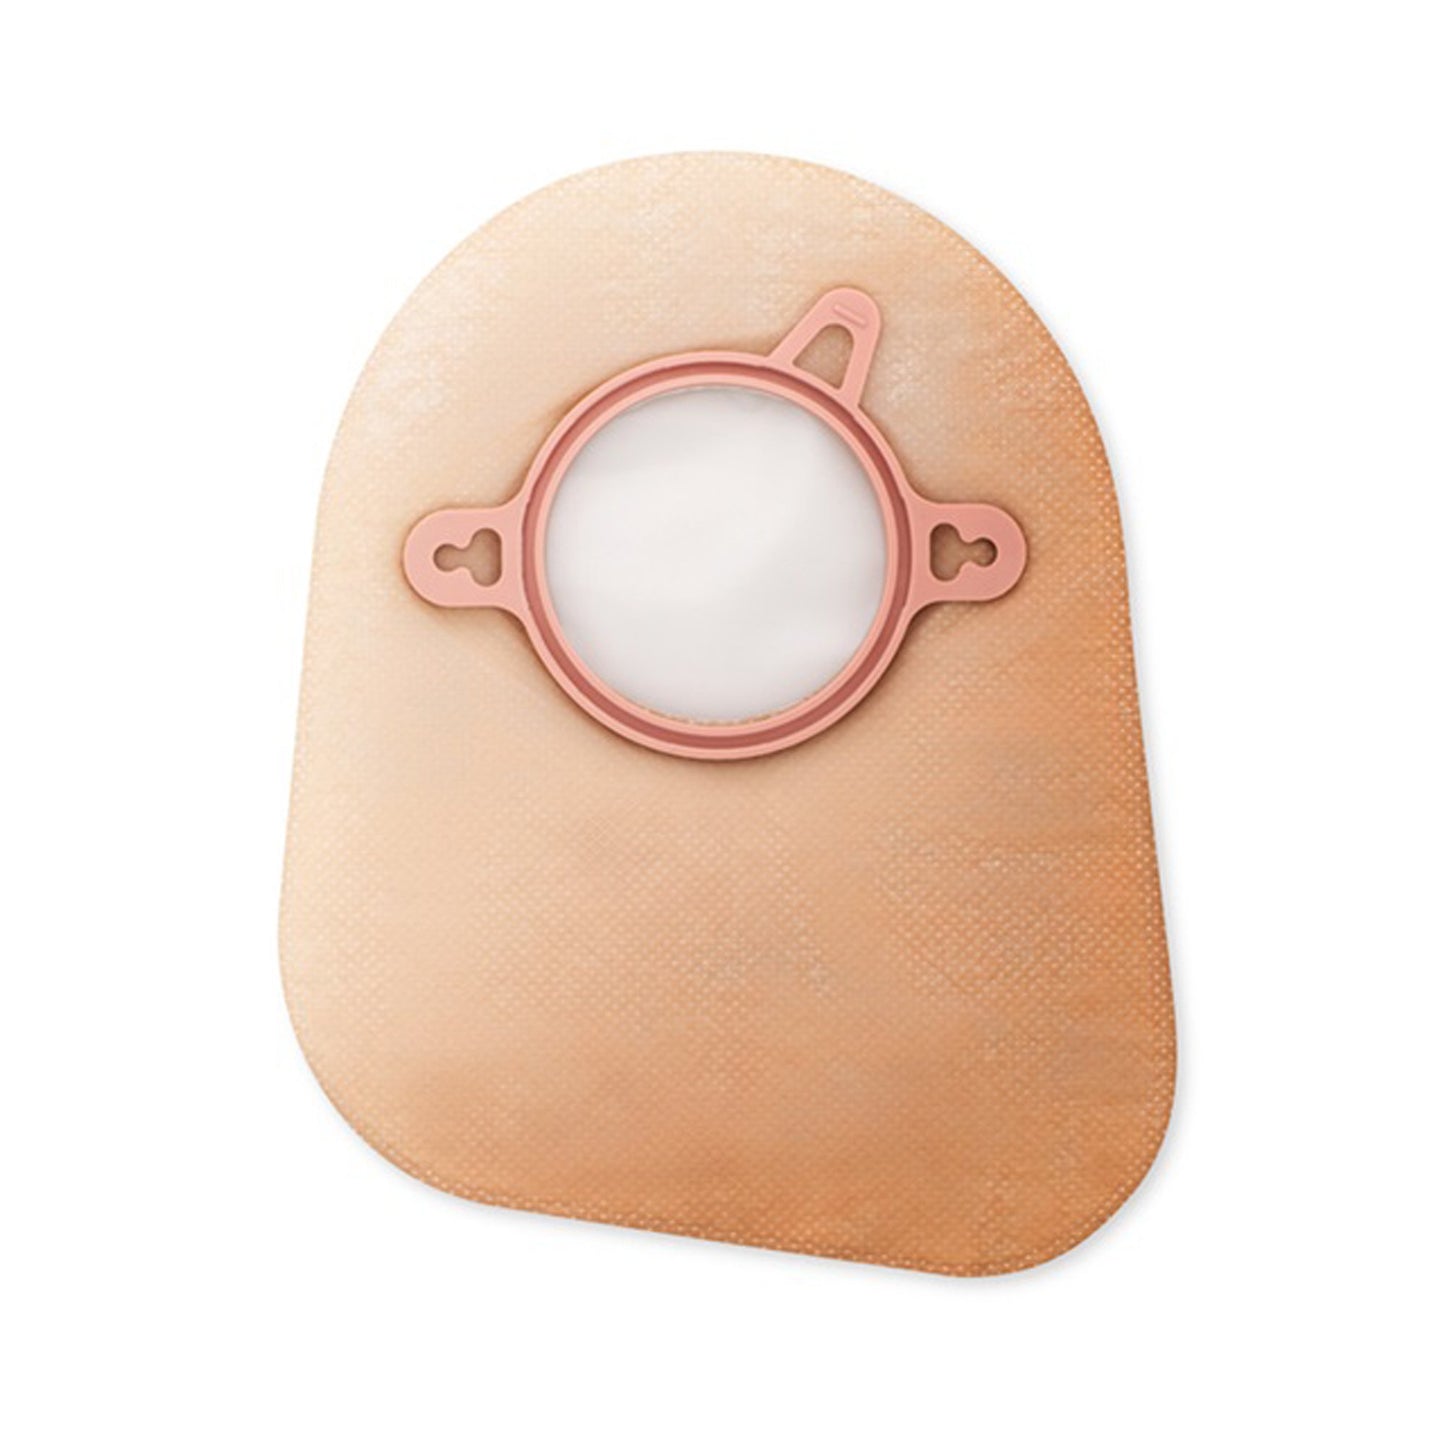 New Image™ Two-Piece Closed End Beige Ostomy Pouch, 9 Inch Length, 1.75 Inch Flange, 60 ct